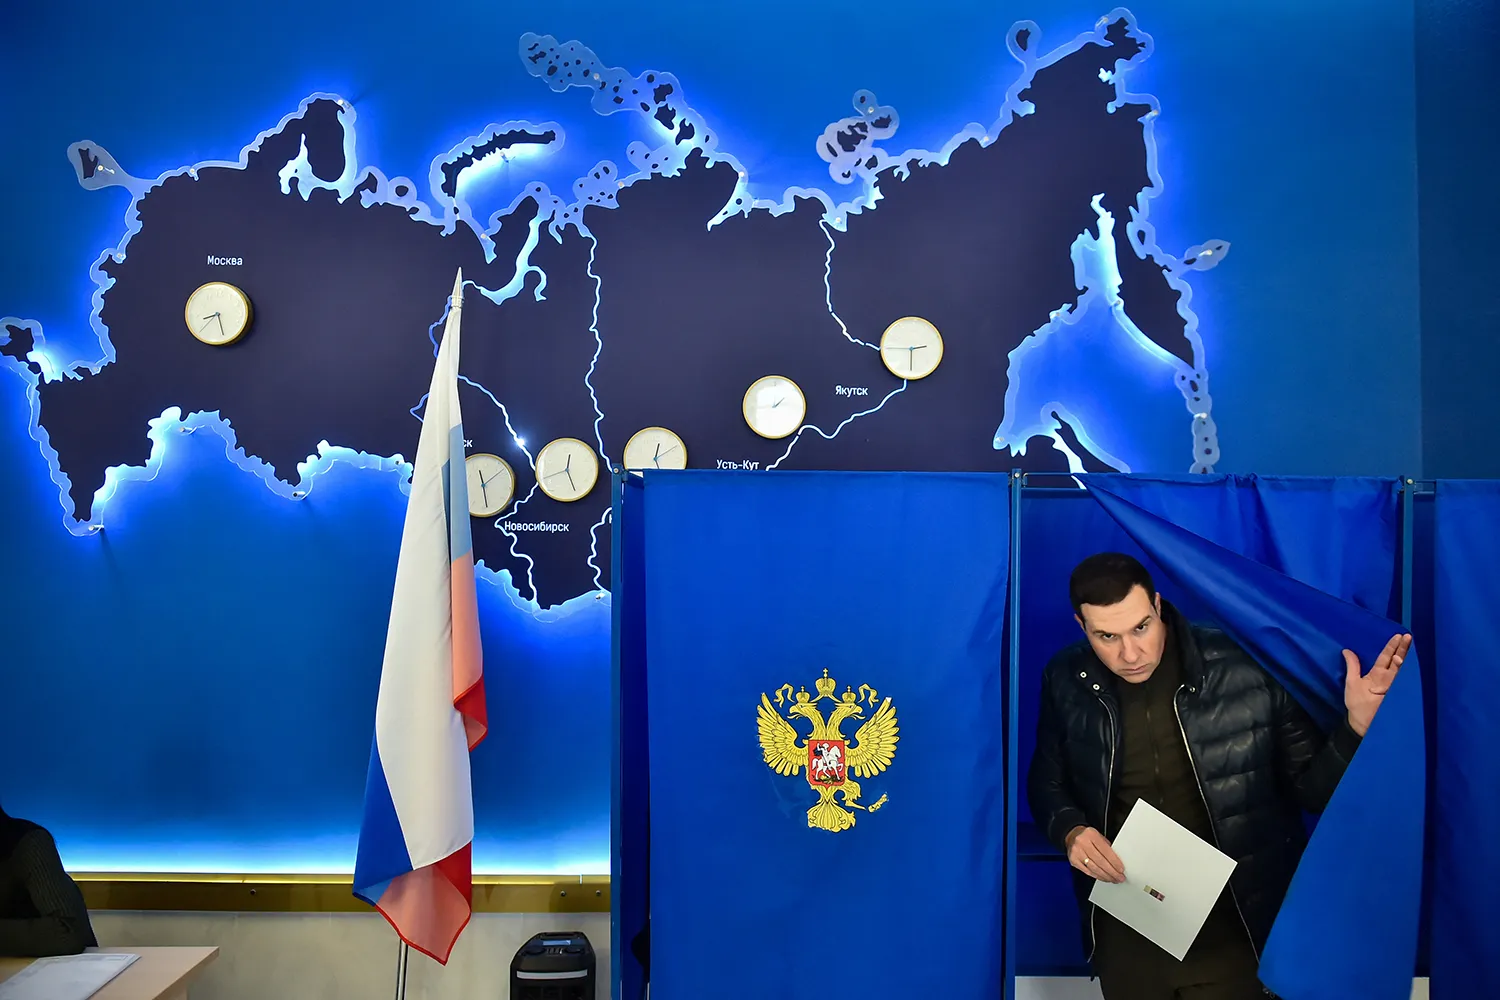 A man wearing a dark puffy coat and holding a piece of paper pushes a curtain aside as he steps out of a voting booth adorned with the crest of Russia. Behind him is a map of Russia with clocks of different time zones. A Russian flag on a stand is in front of the map.